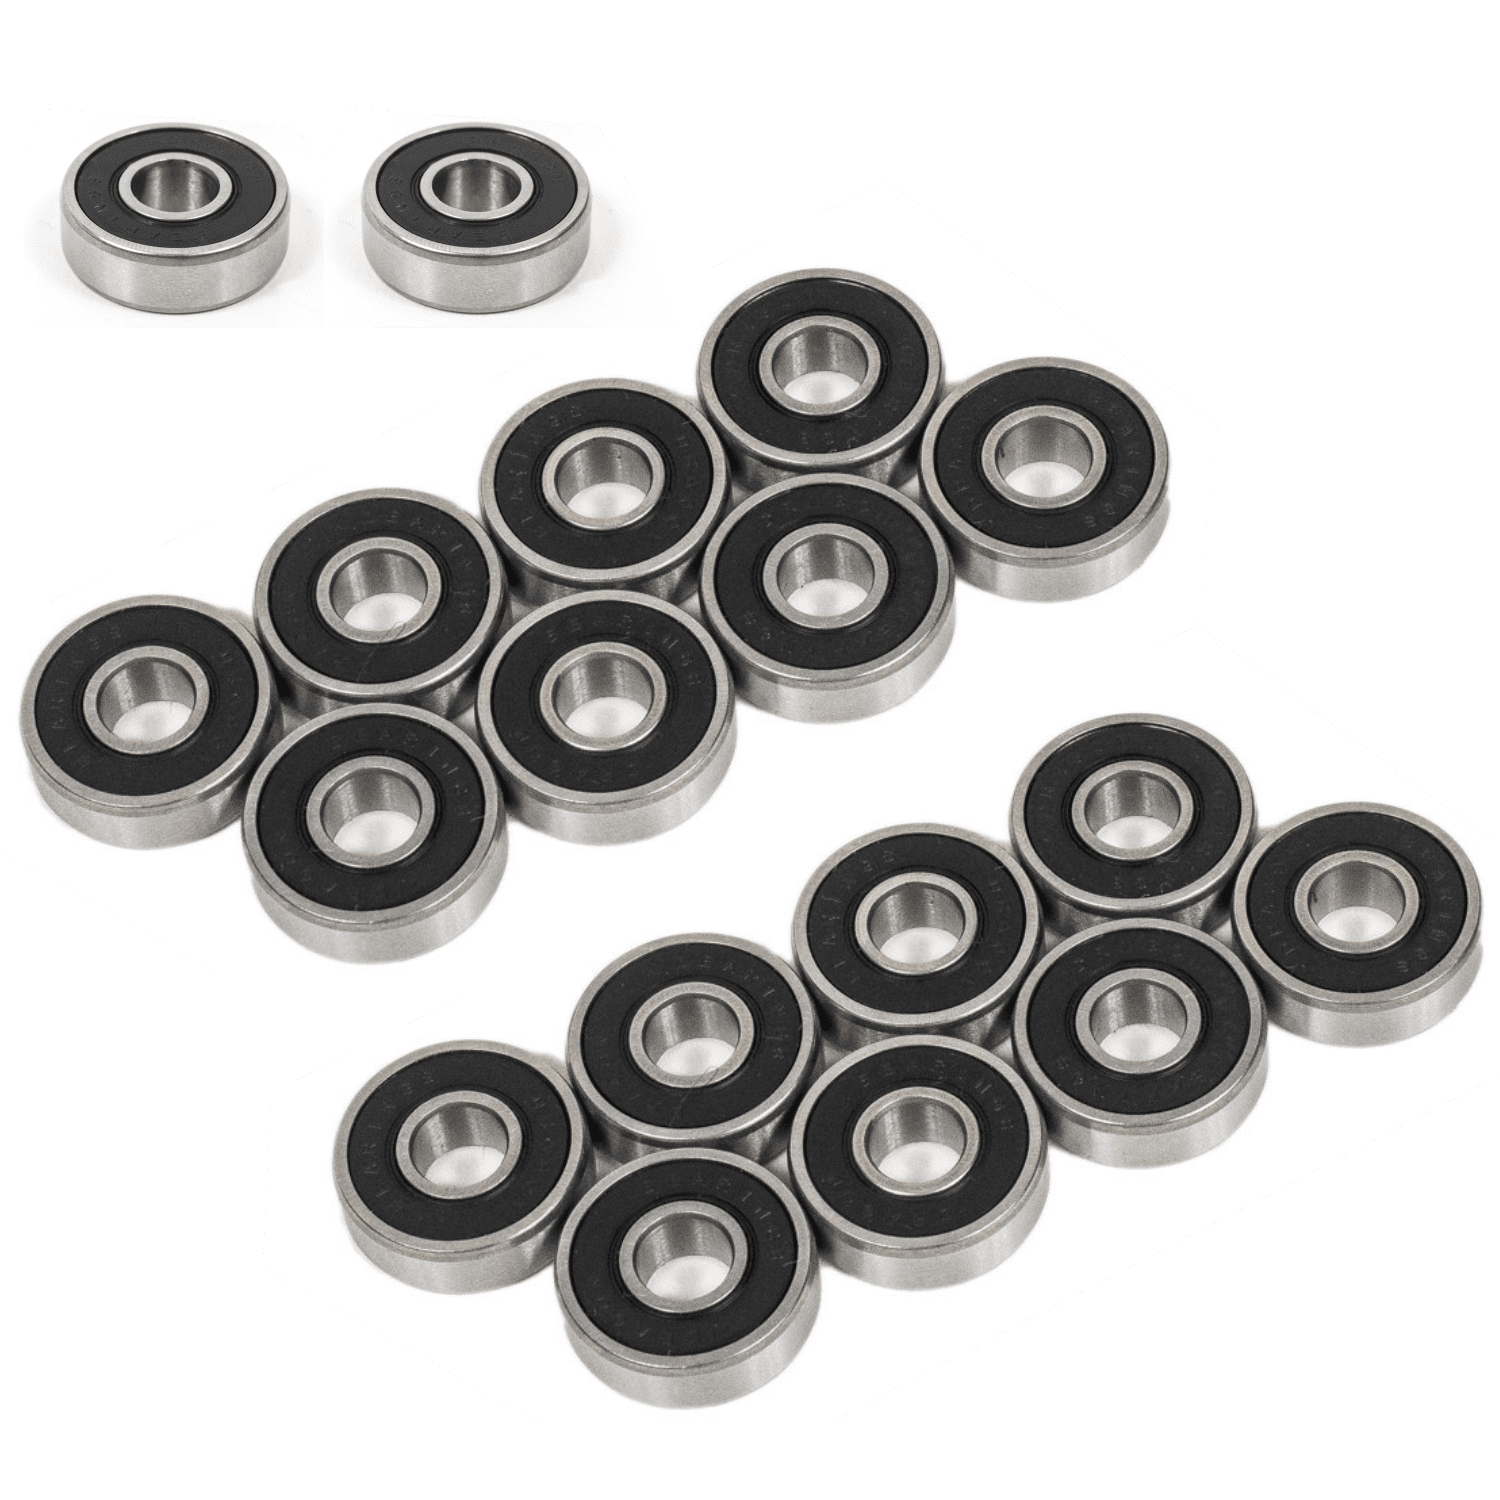 Spinners 20 Pack Double Shielded for Skateboards Precision 608-2RS Bearings 